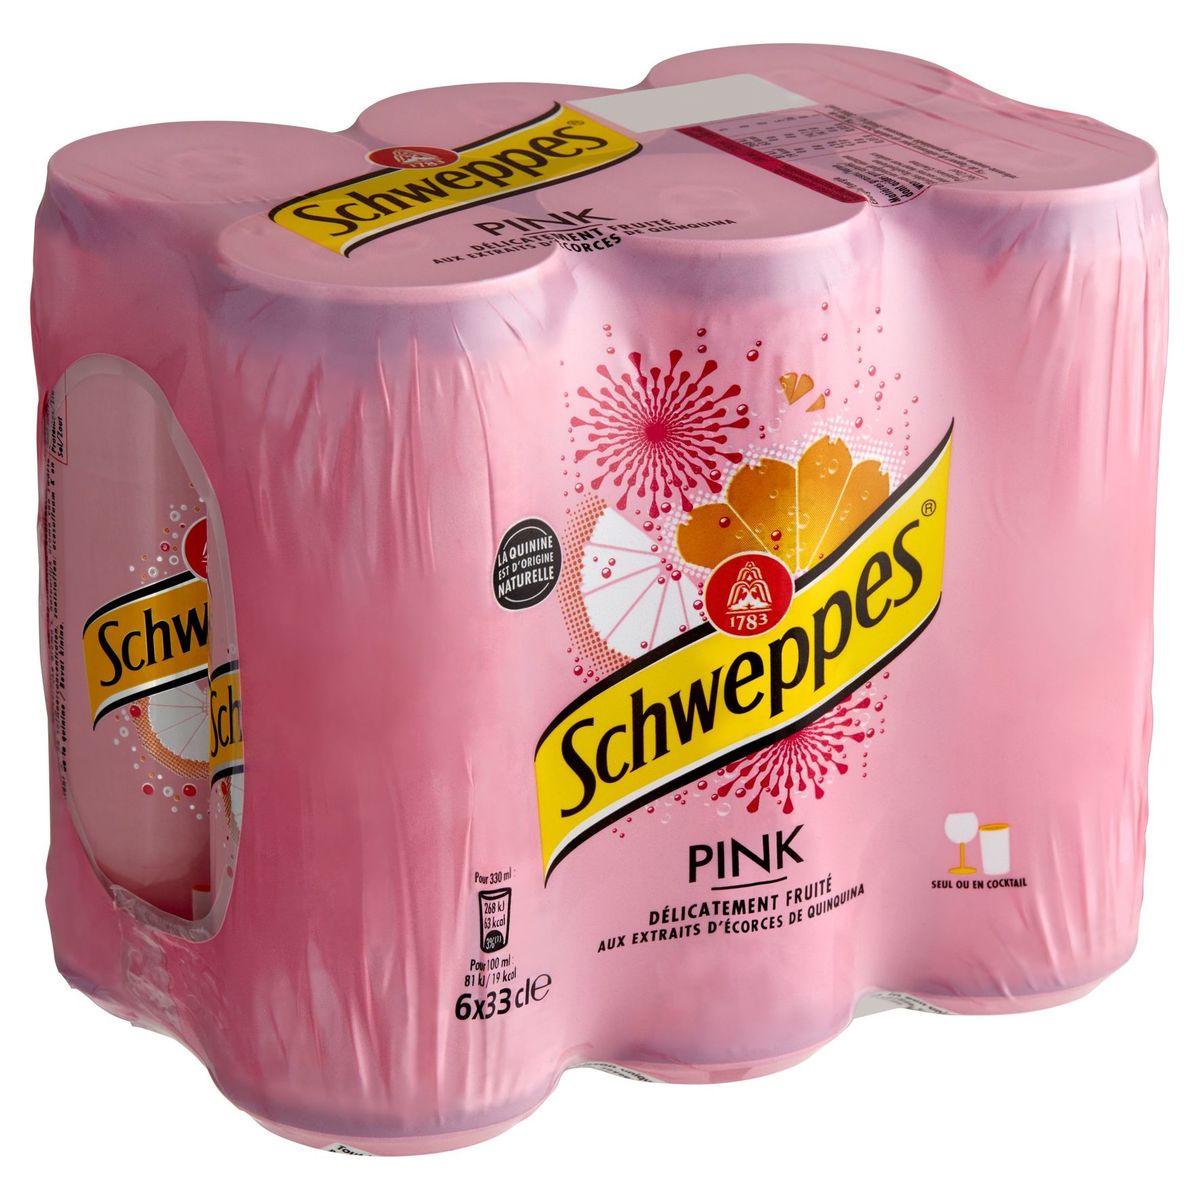 Schweppes Pink Tonic 6 x 33 cl